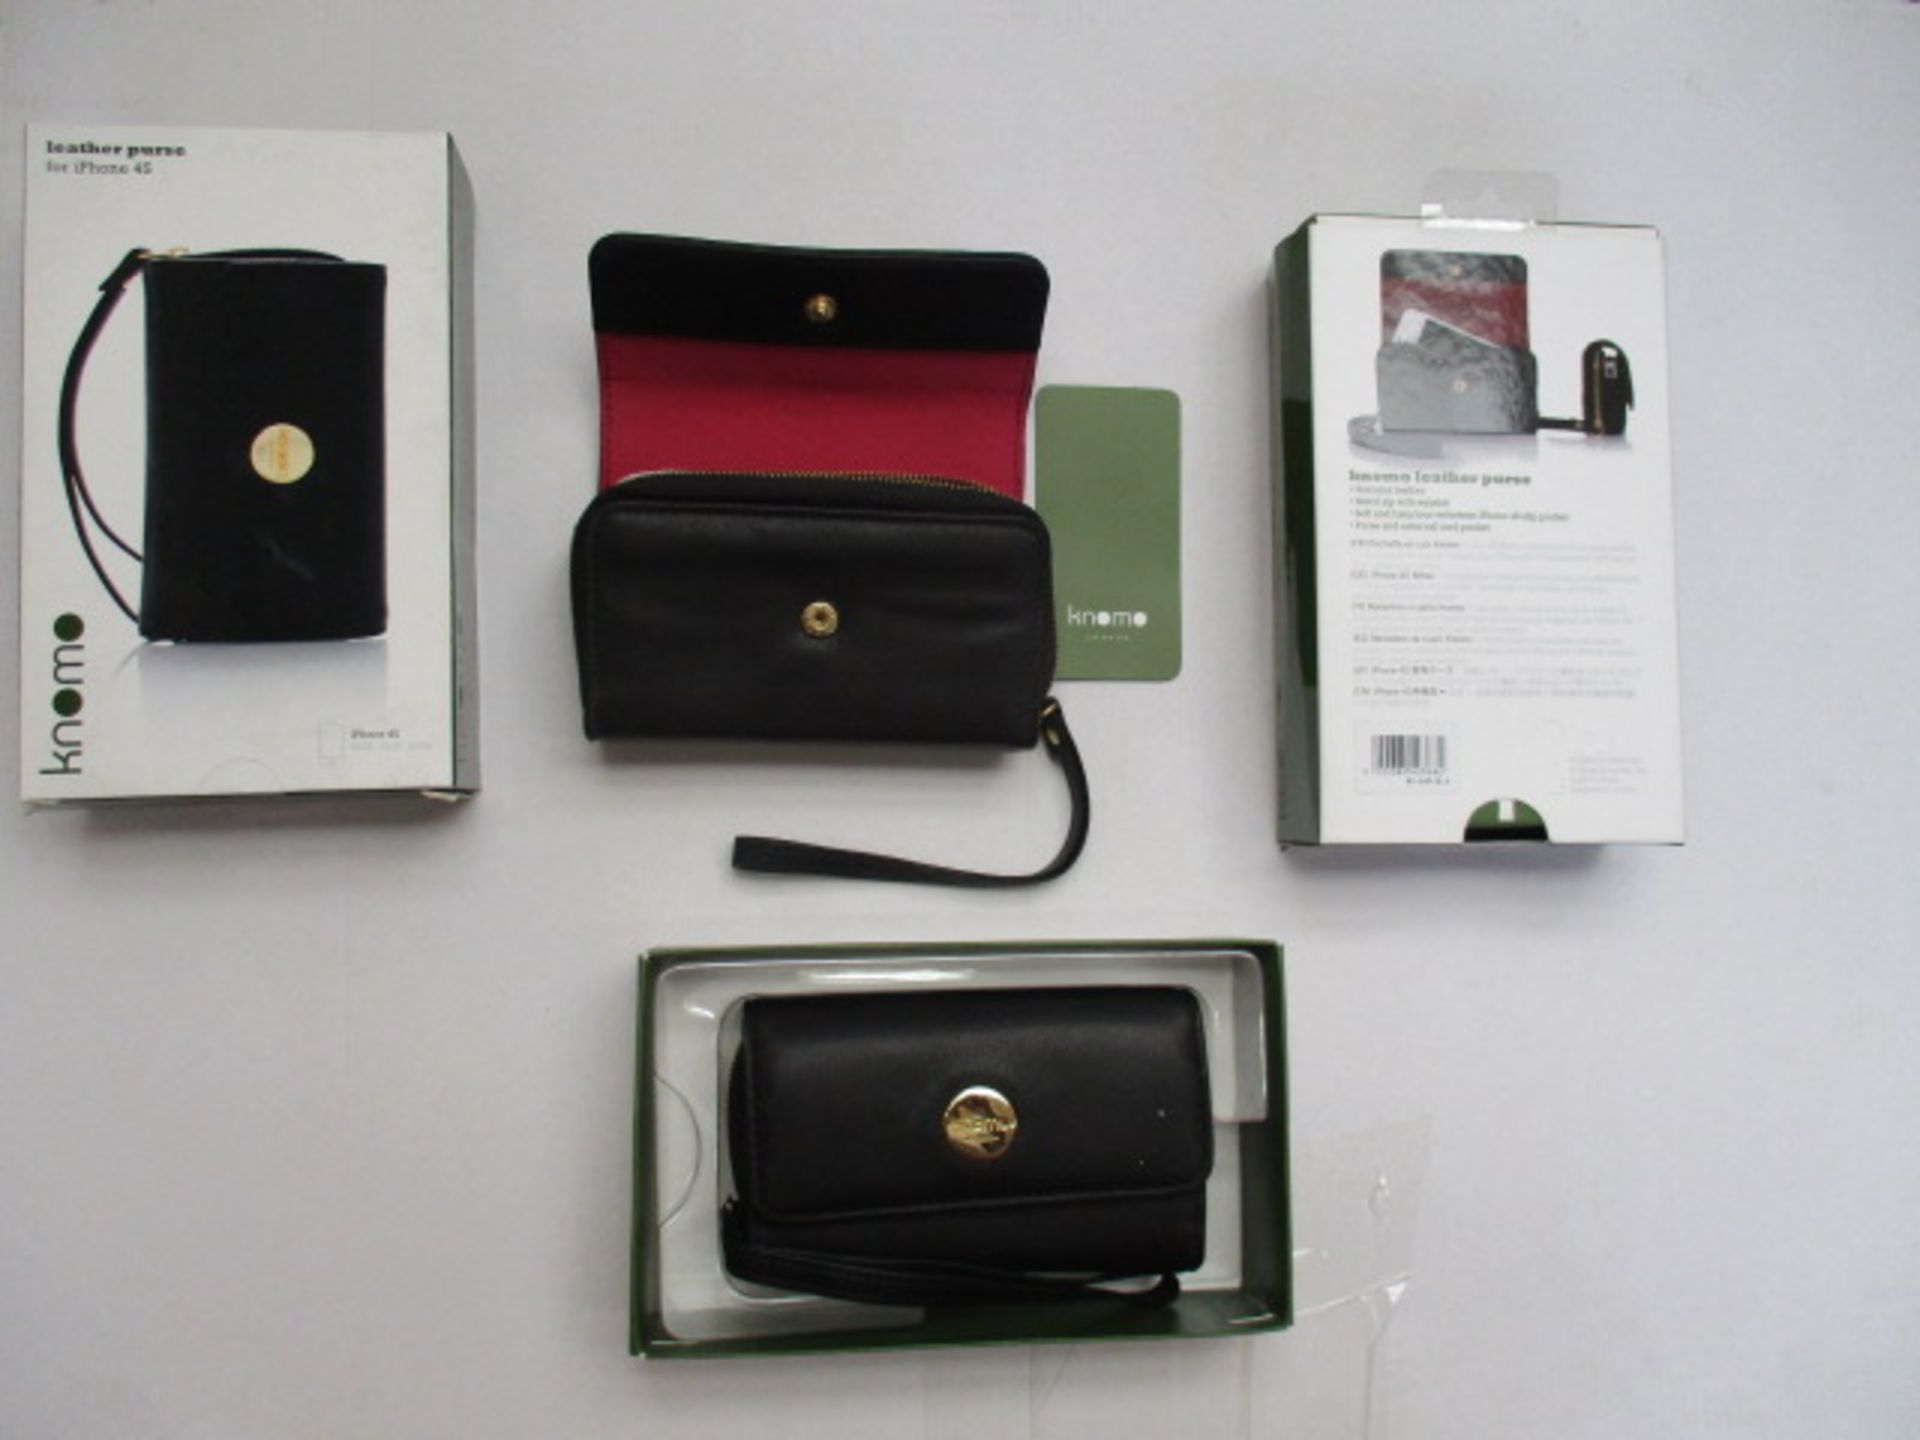 10x Knomo leather purse, all brand new and boxed. Will fit similar size mobile fone devices - high